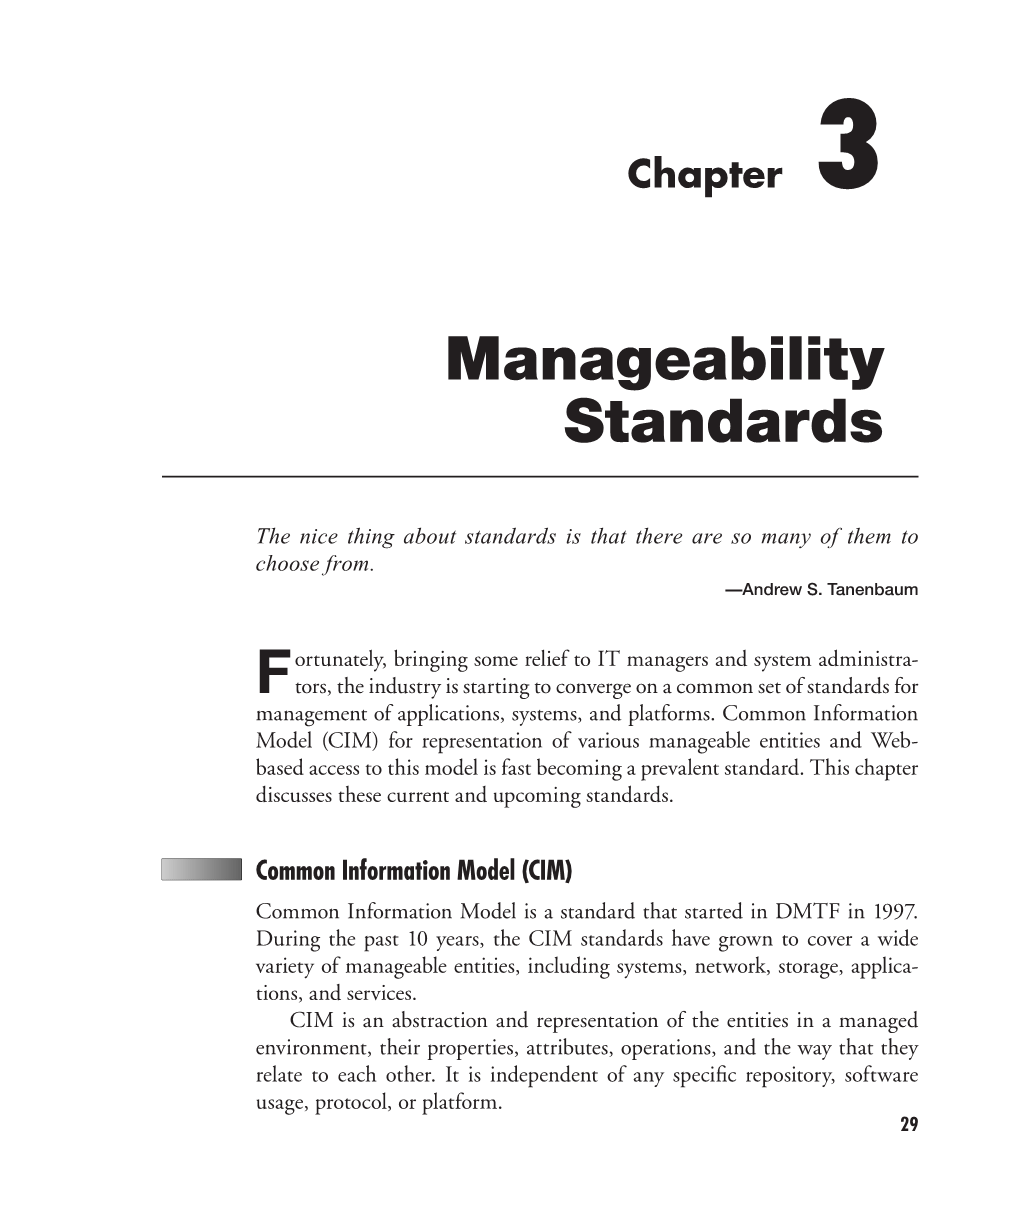 Manageability Standards